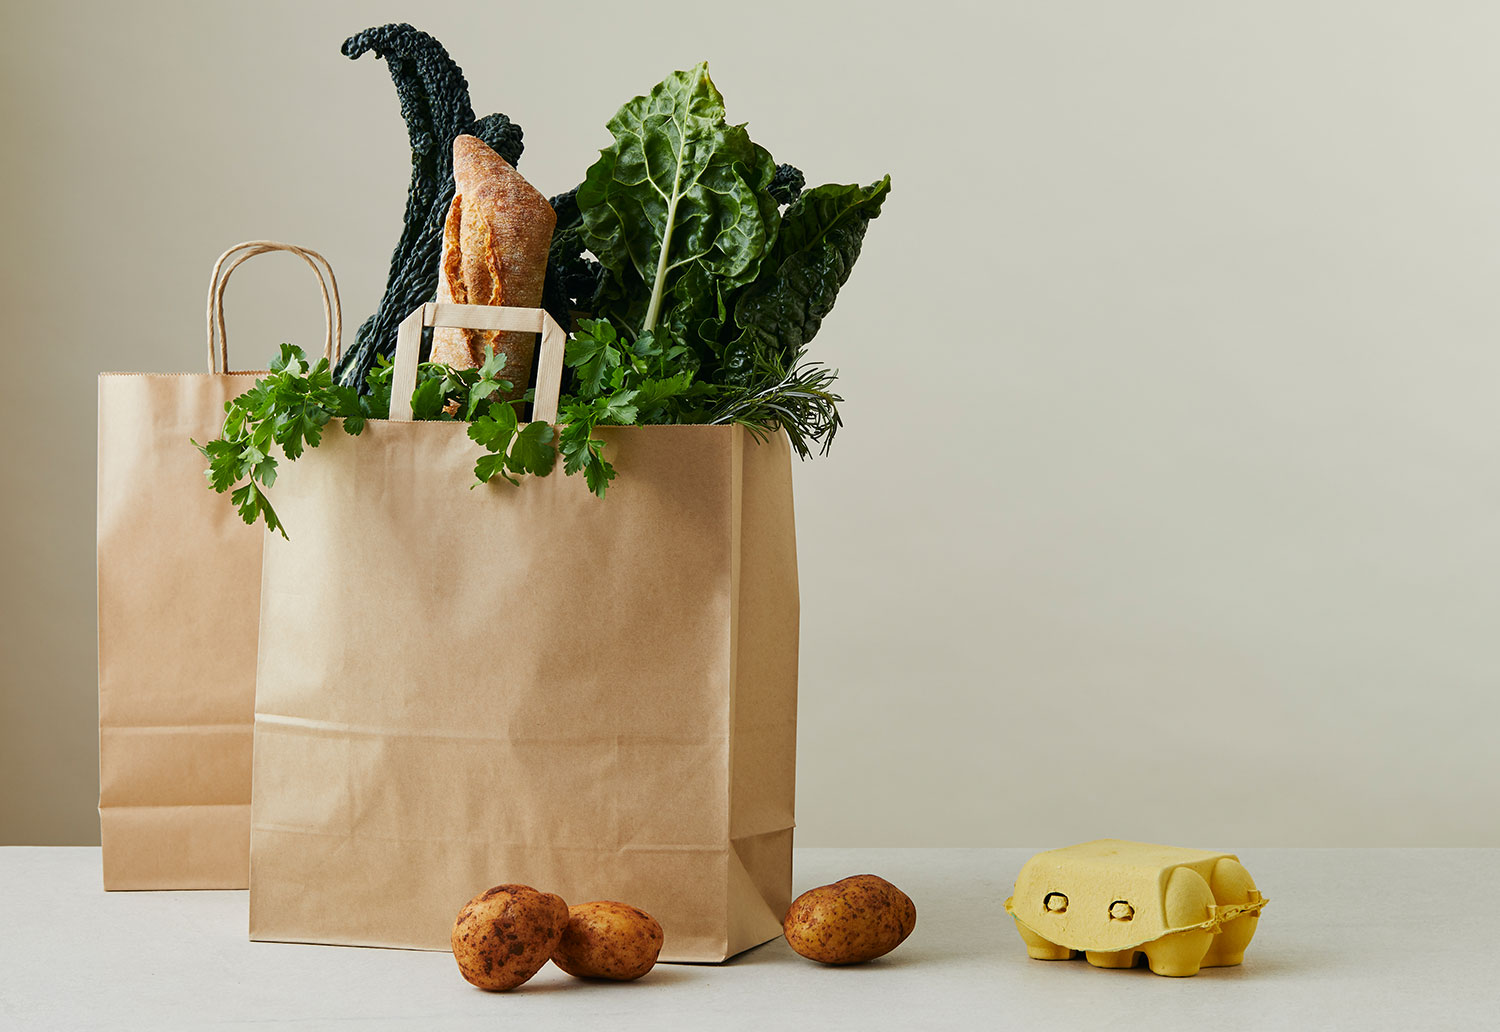 Image of groceries in a recyclable paper bag